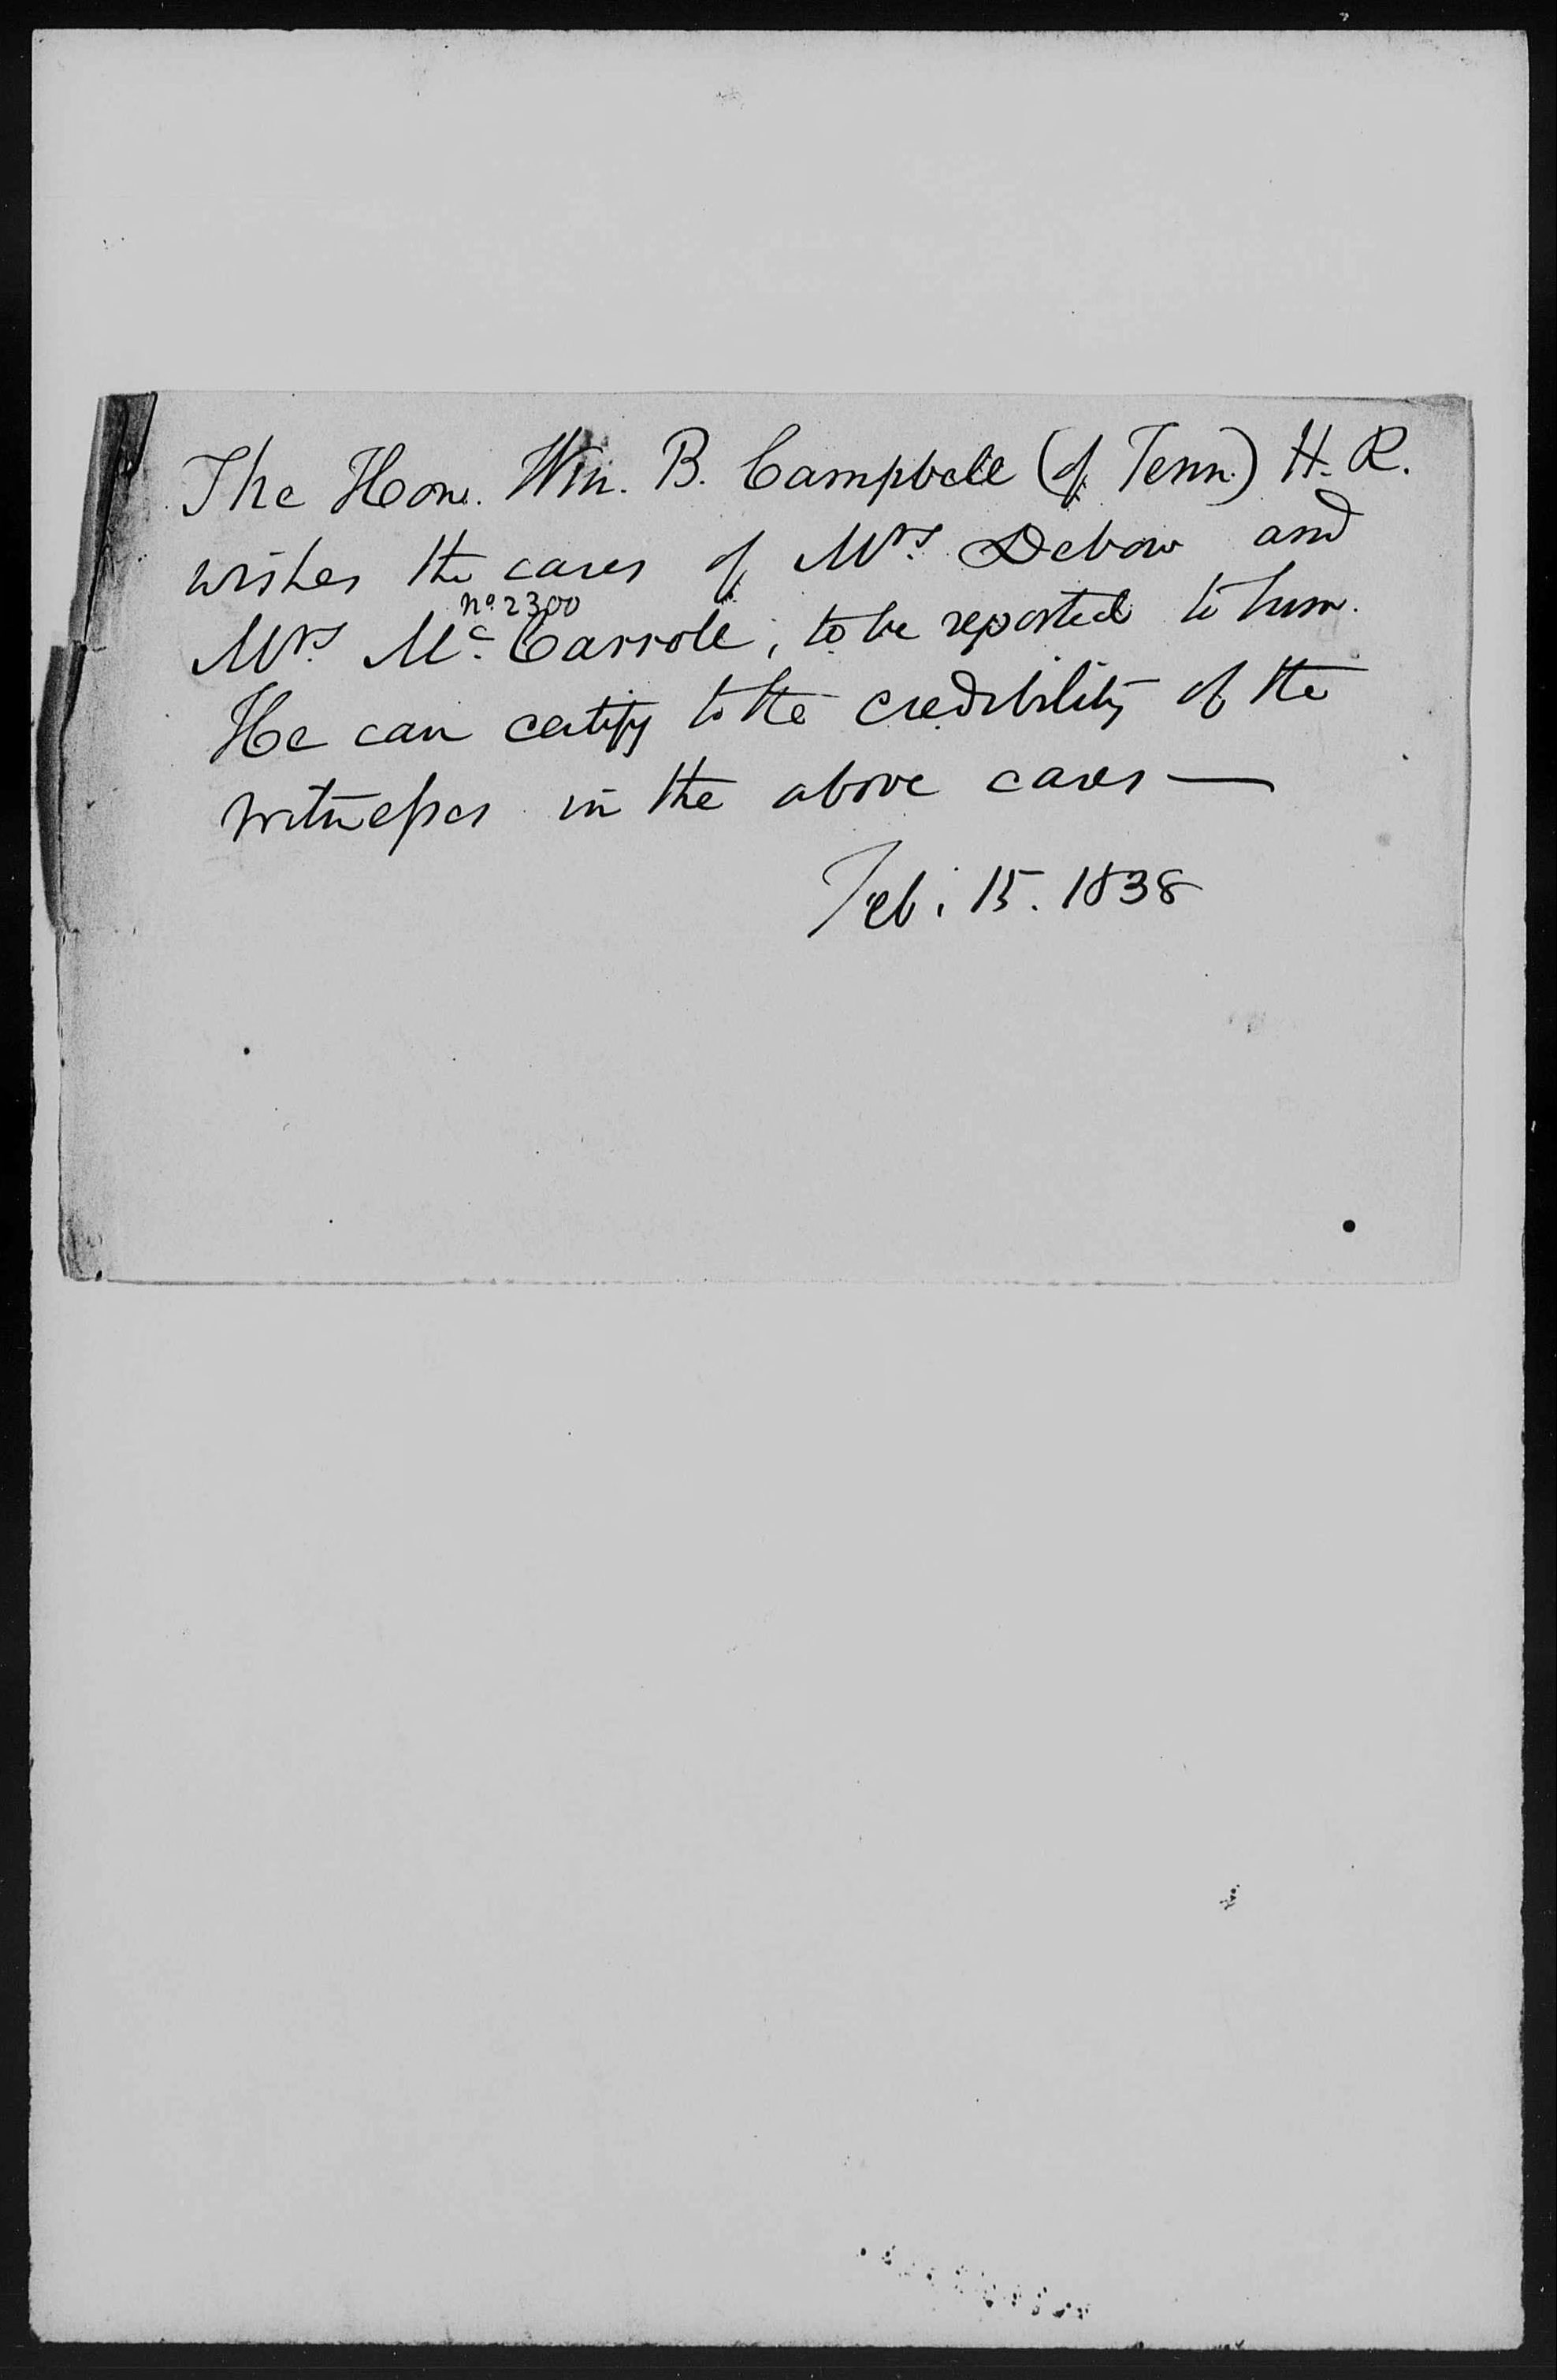 Order from William B. Campbell on the Pension Claim of Rachel Debow, 15 February 1838, page 1